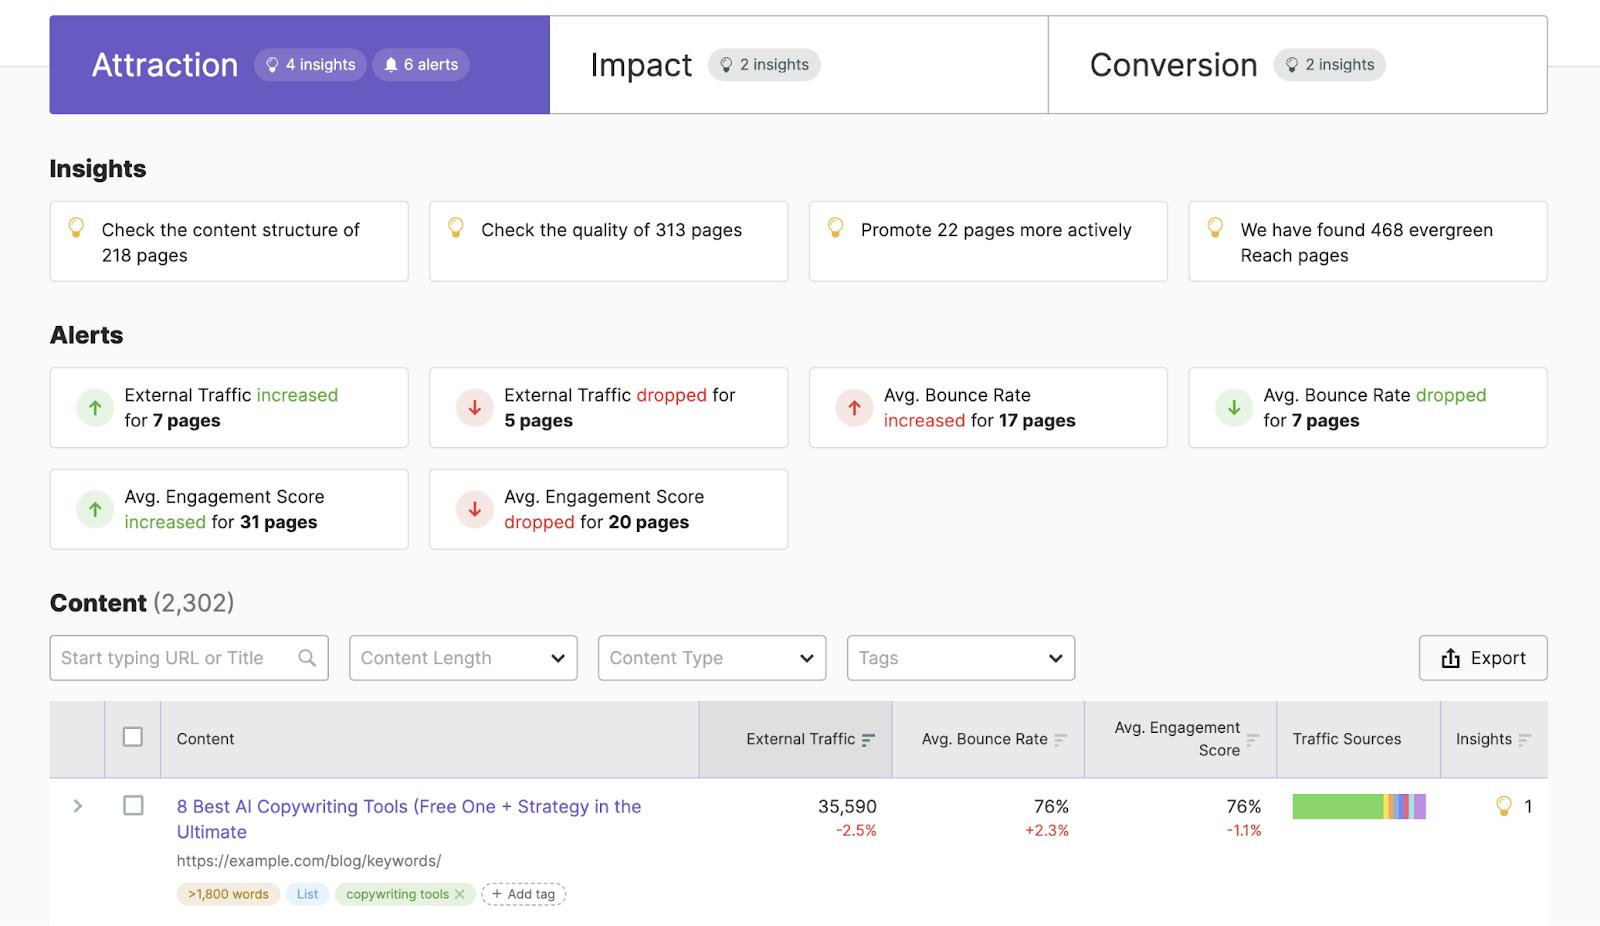 "Attraction" dashboard successful  ImpactHero showing insights, alerts, and content